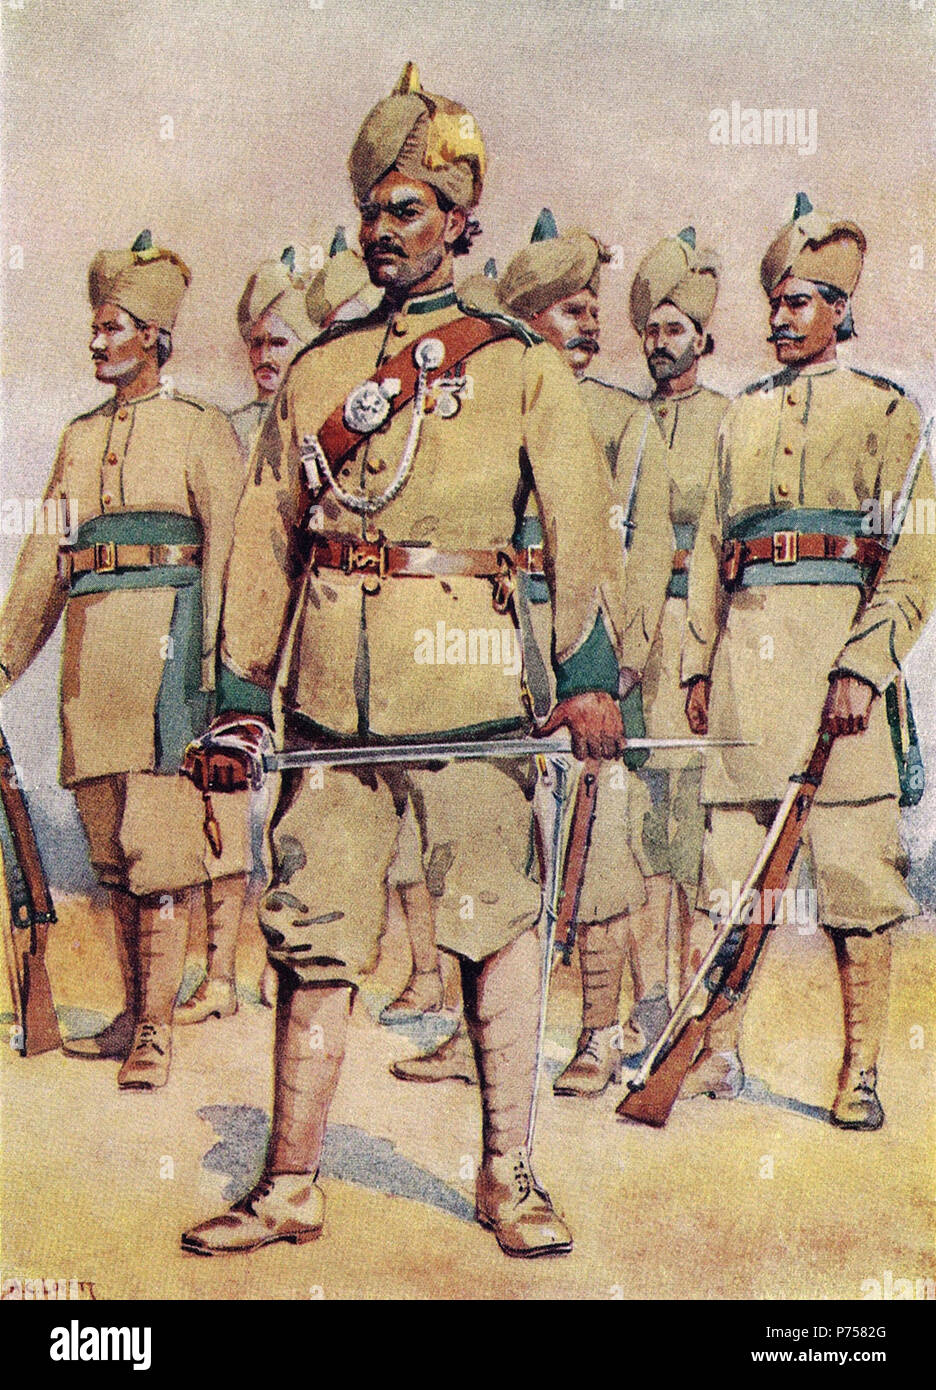 English: The 33rd Punjabi Army (A Picture of a Commander: A Punjabi Subadar) Painting is before 1923. circa 1909AD 3 33rd Punjabi Army (Commander Punjabi Subadar) by A C Lovett Stock Photo